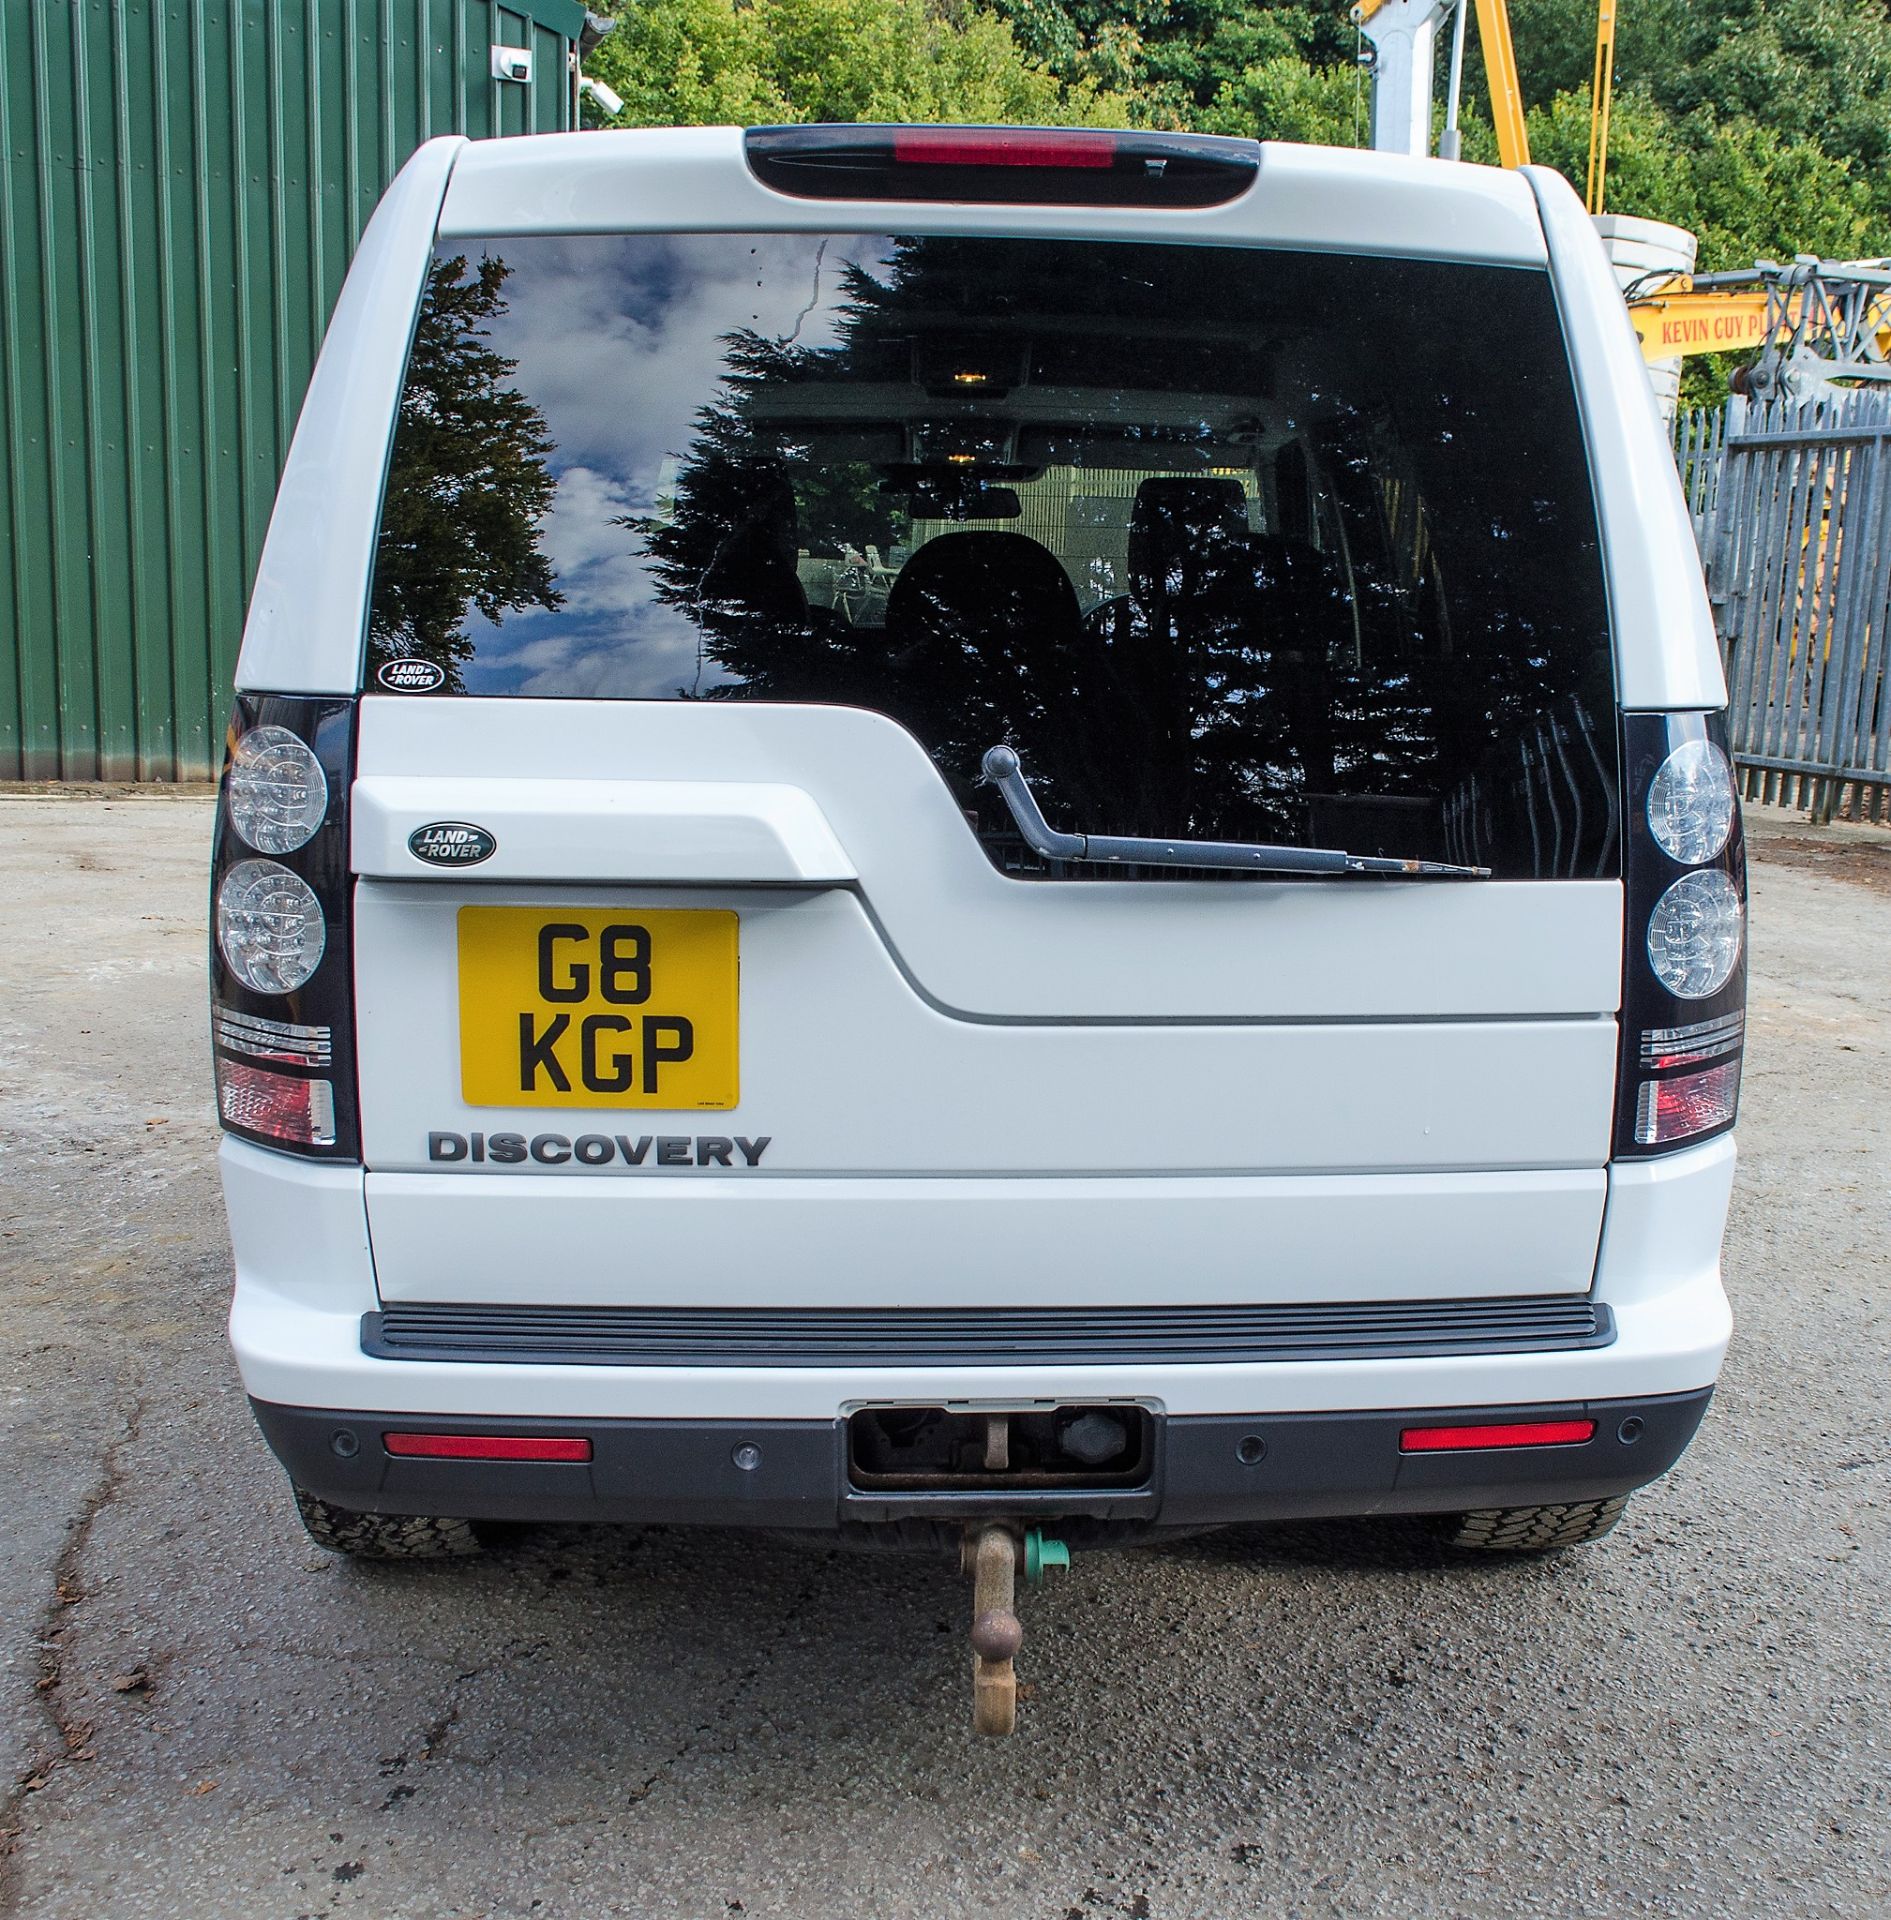 Land Rover Discovery 4 SE SDV6 Commercial 4wd SUV Reg No: YL65 YKA (Private plate now removed) - Image 6 of 28